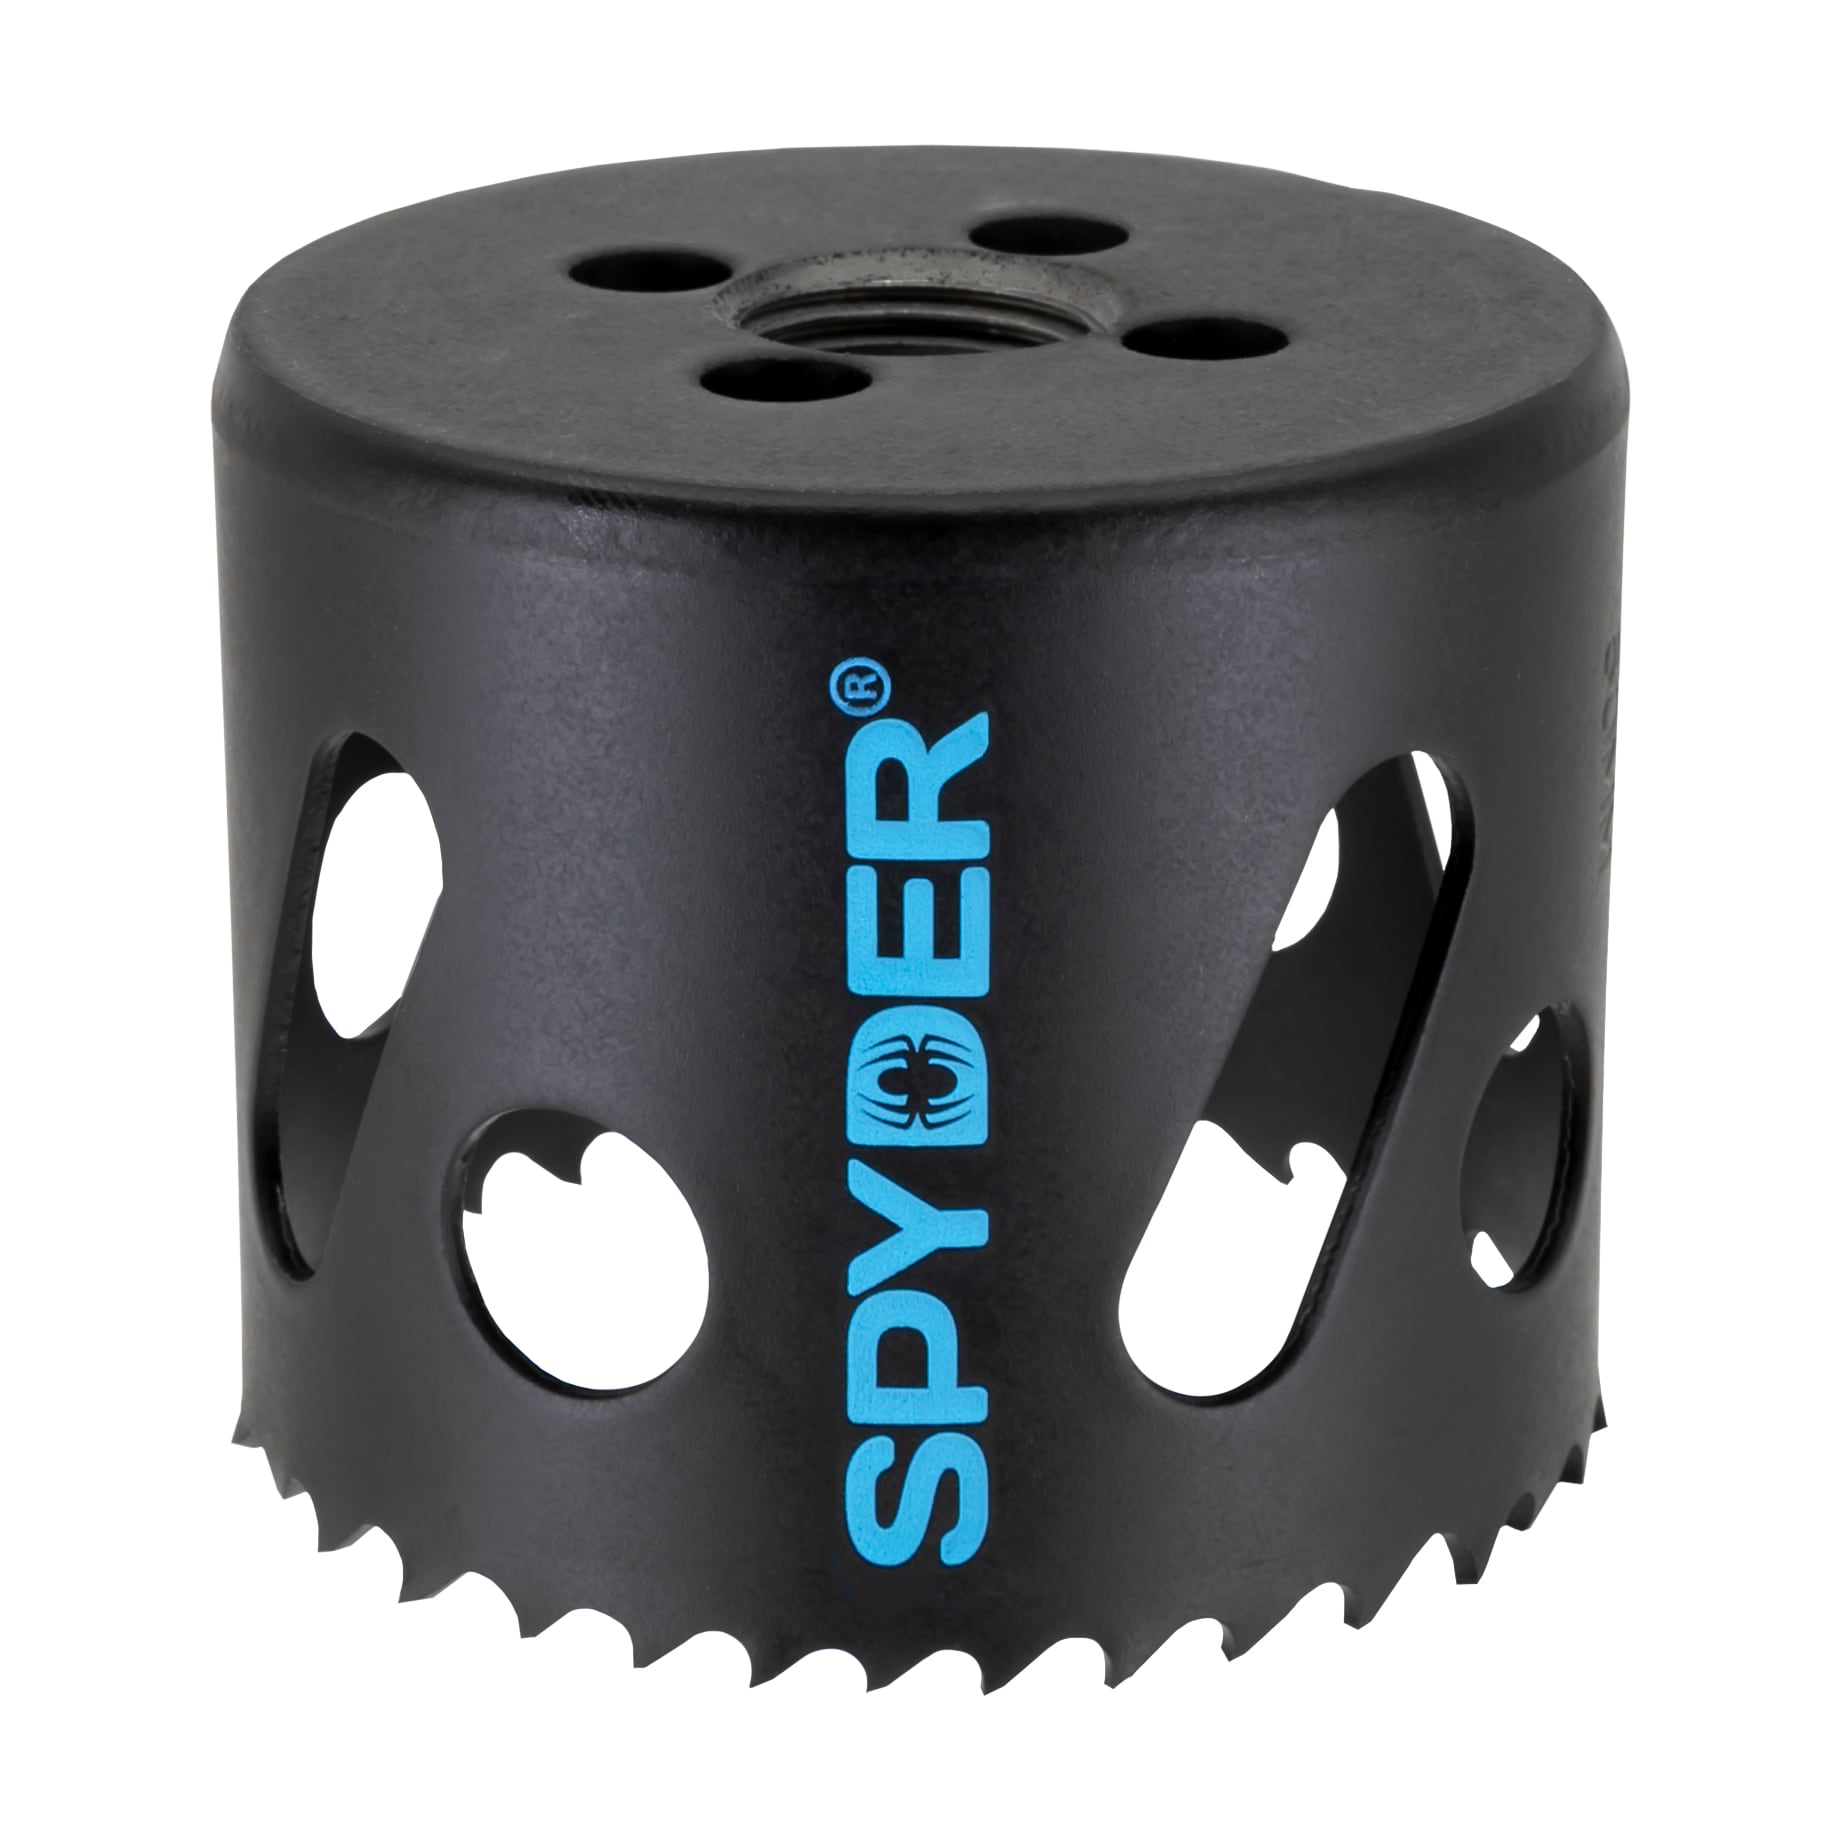 Spyder Products - Power Tool Accessories: Hole Saws, Jig Saws